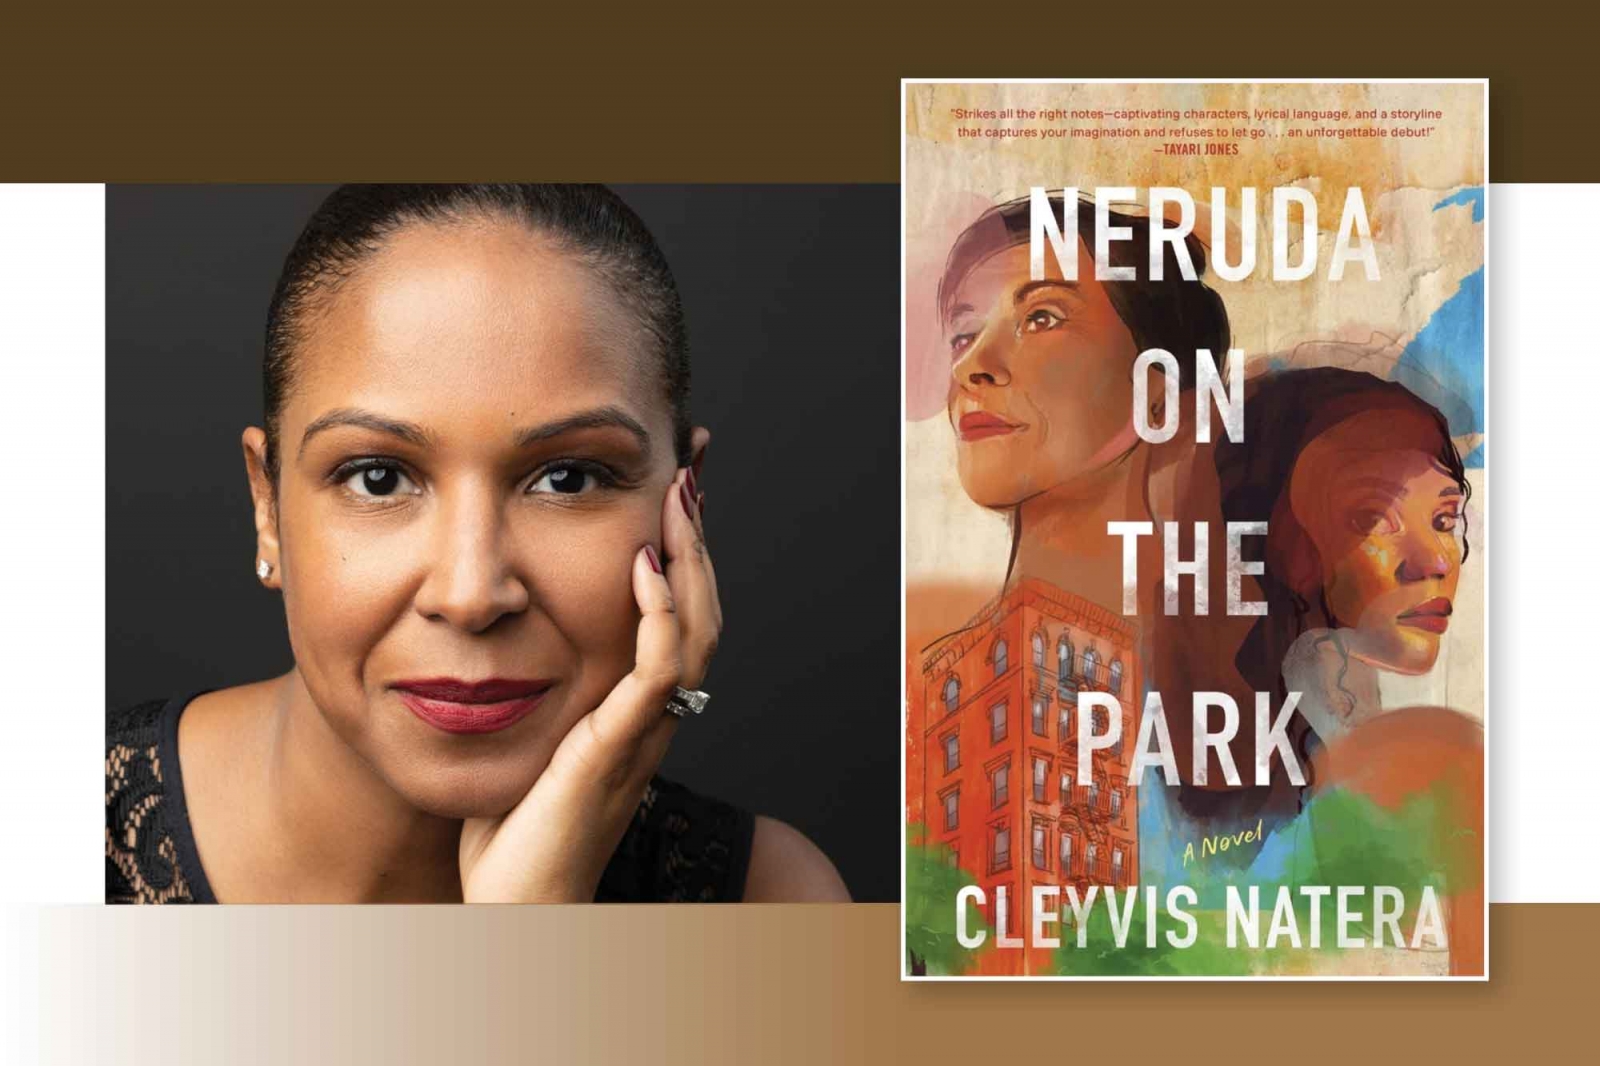 A photograph of Cleyvis Natera juxtaposed with the cover to her book Neruda on the Park